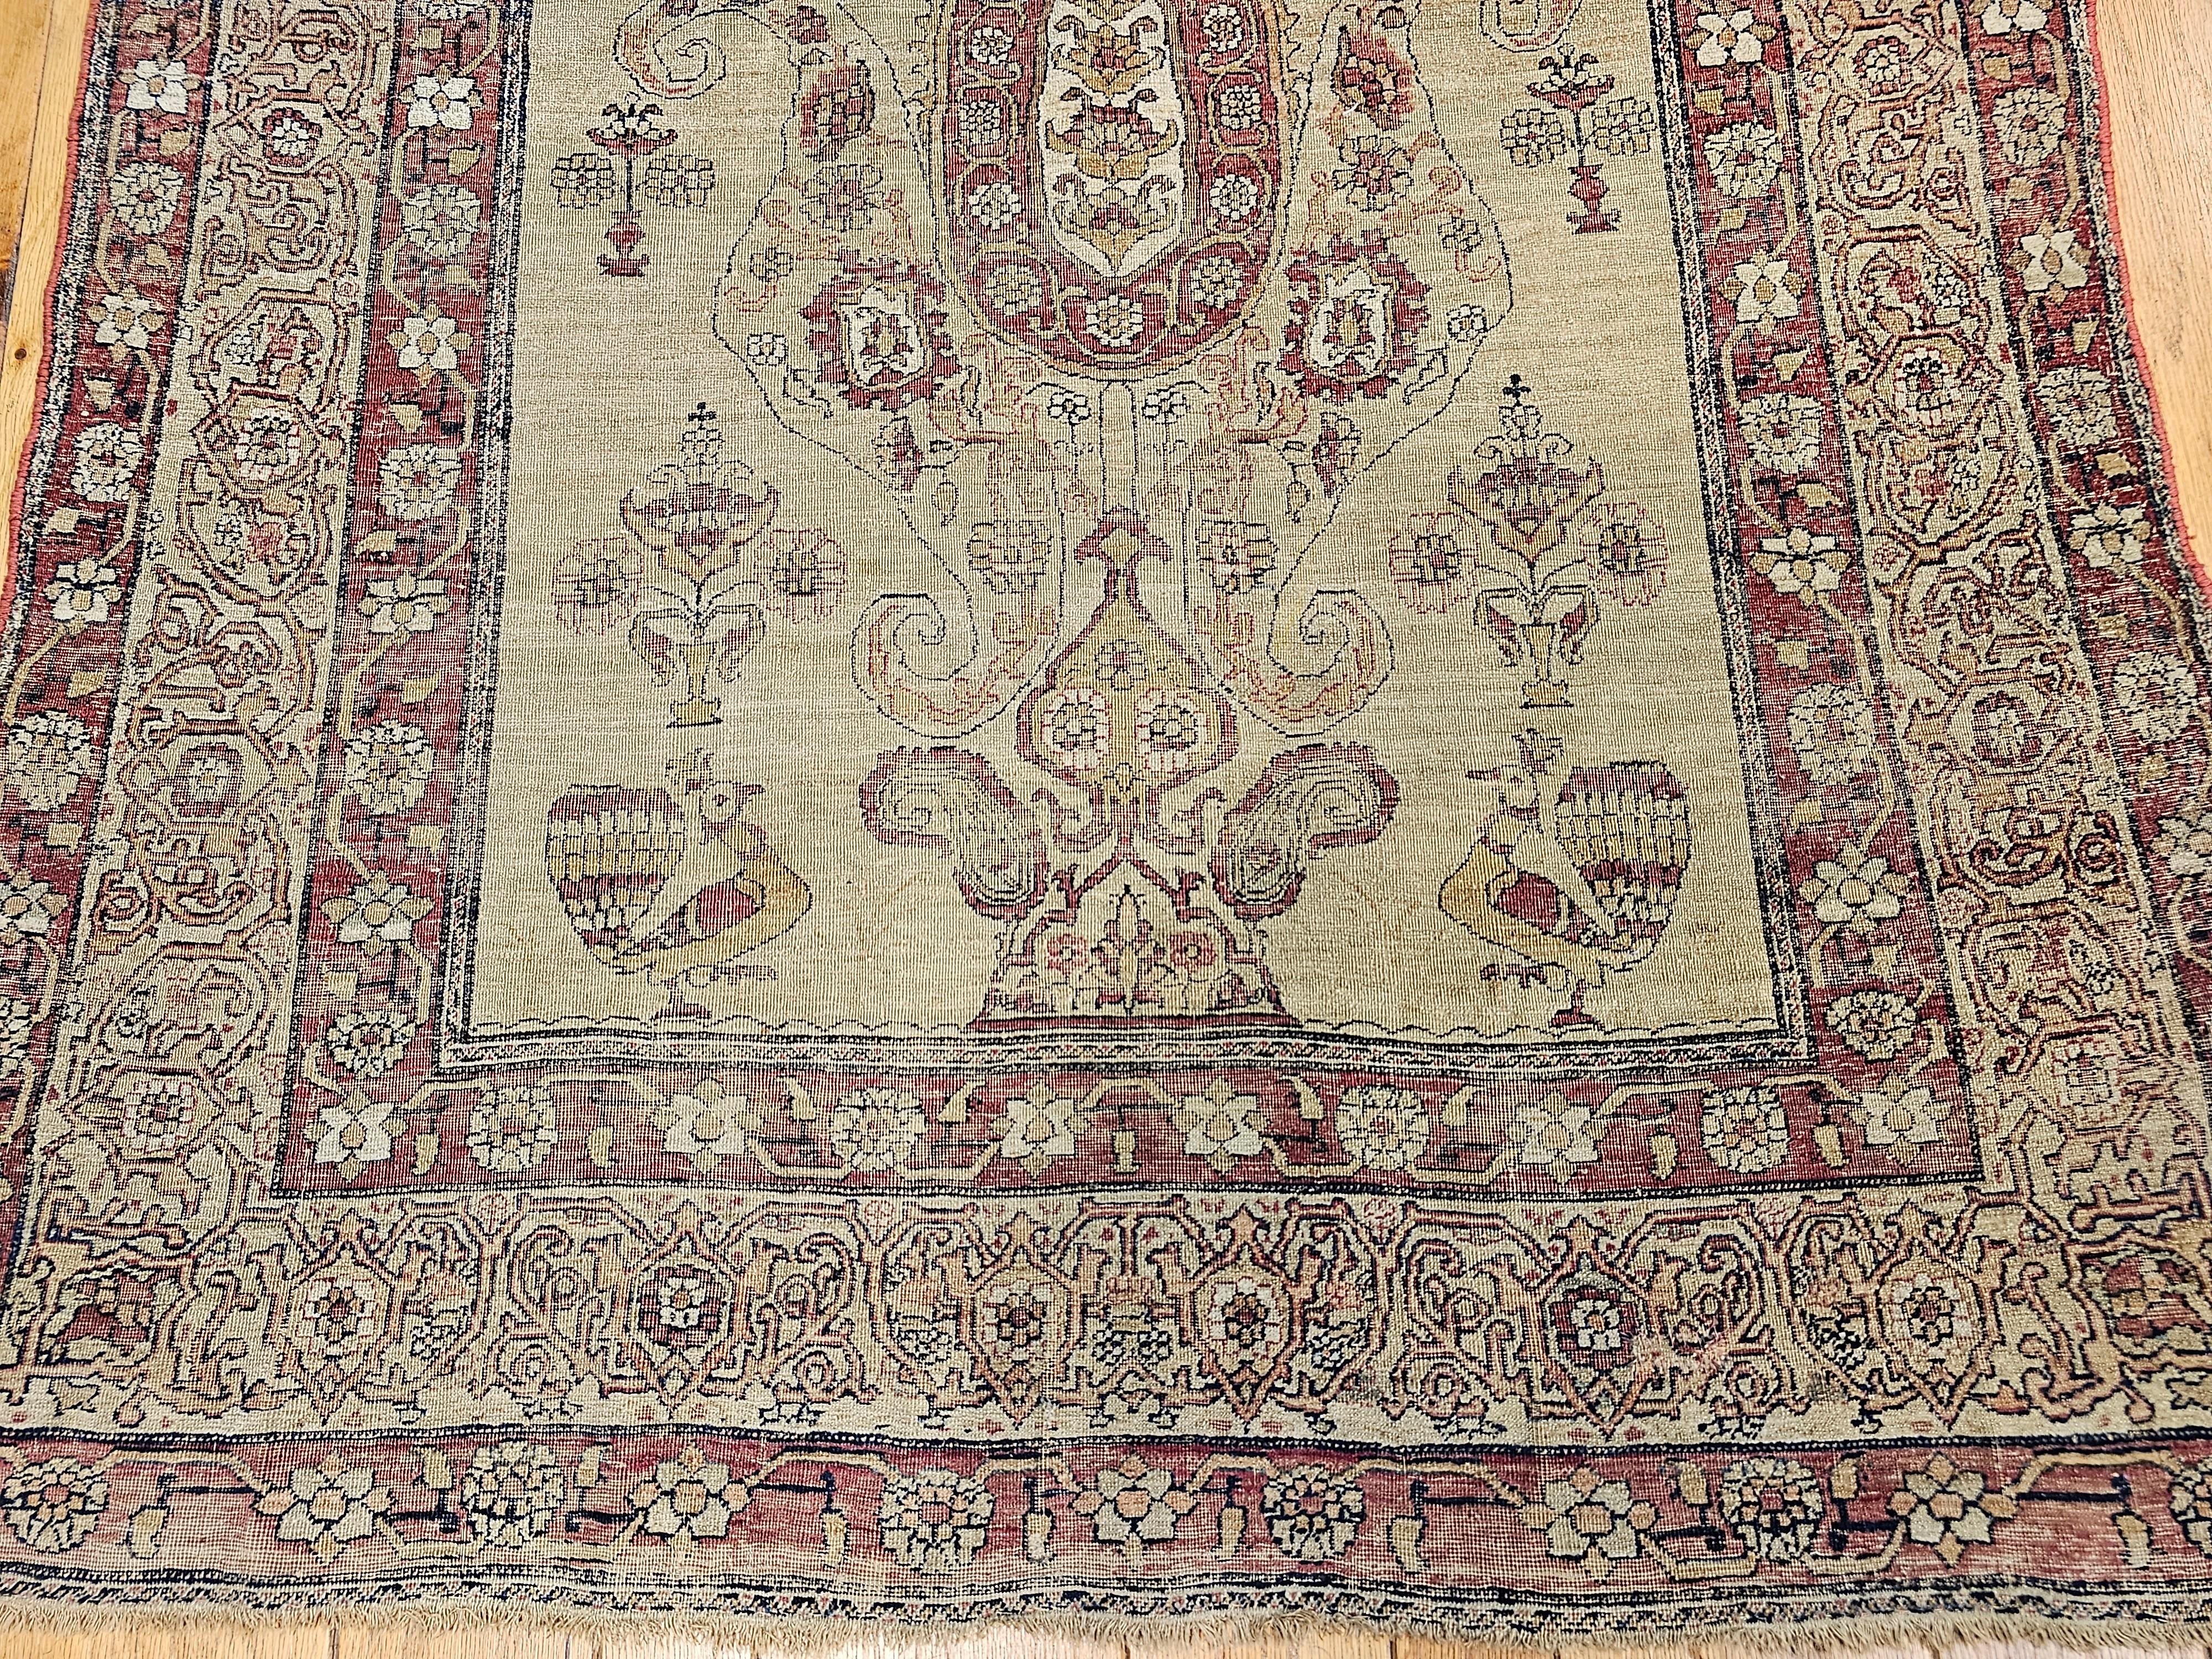 19th Century Persian Kerman Lavar Pictorial “Tree of Life” Rug in Camel, Red For Sale 6